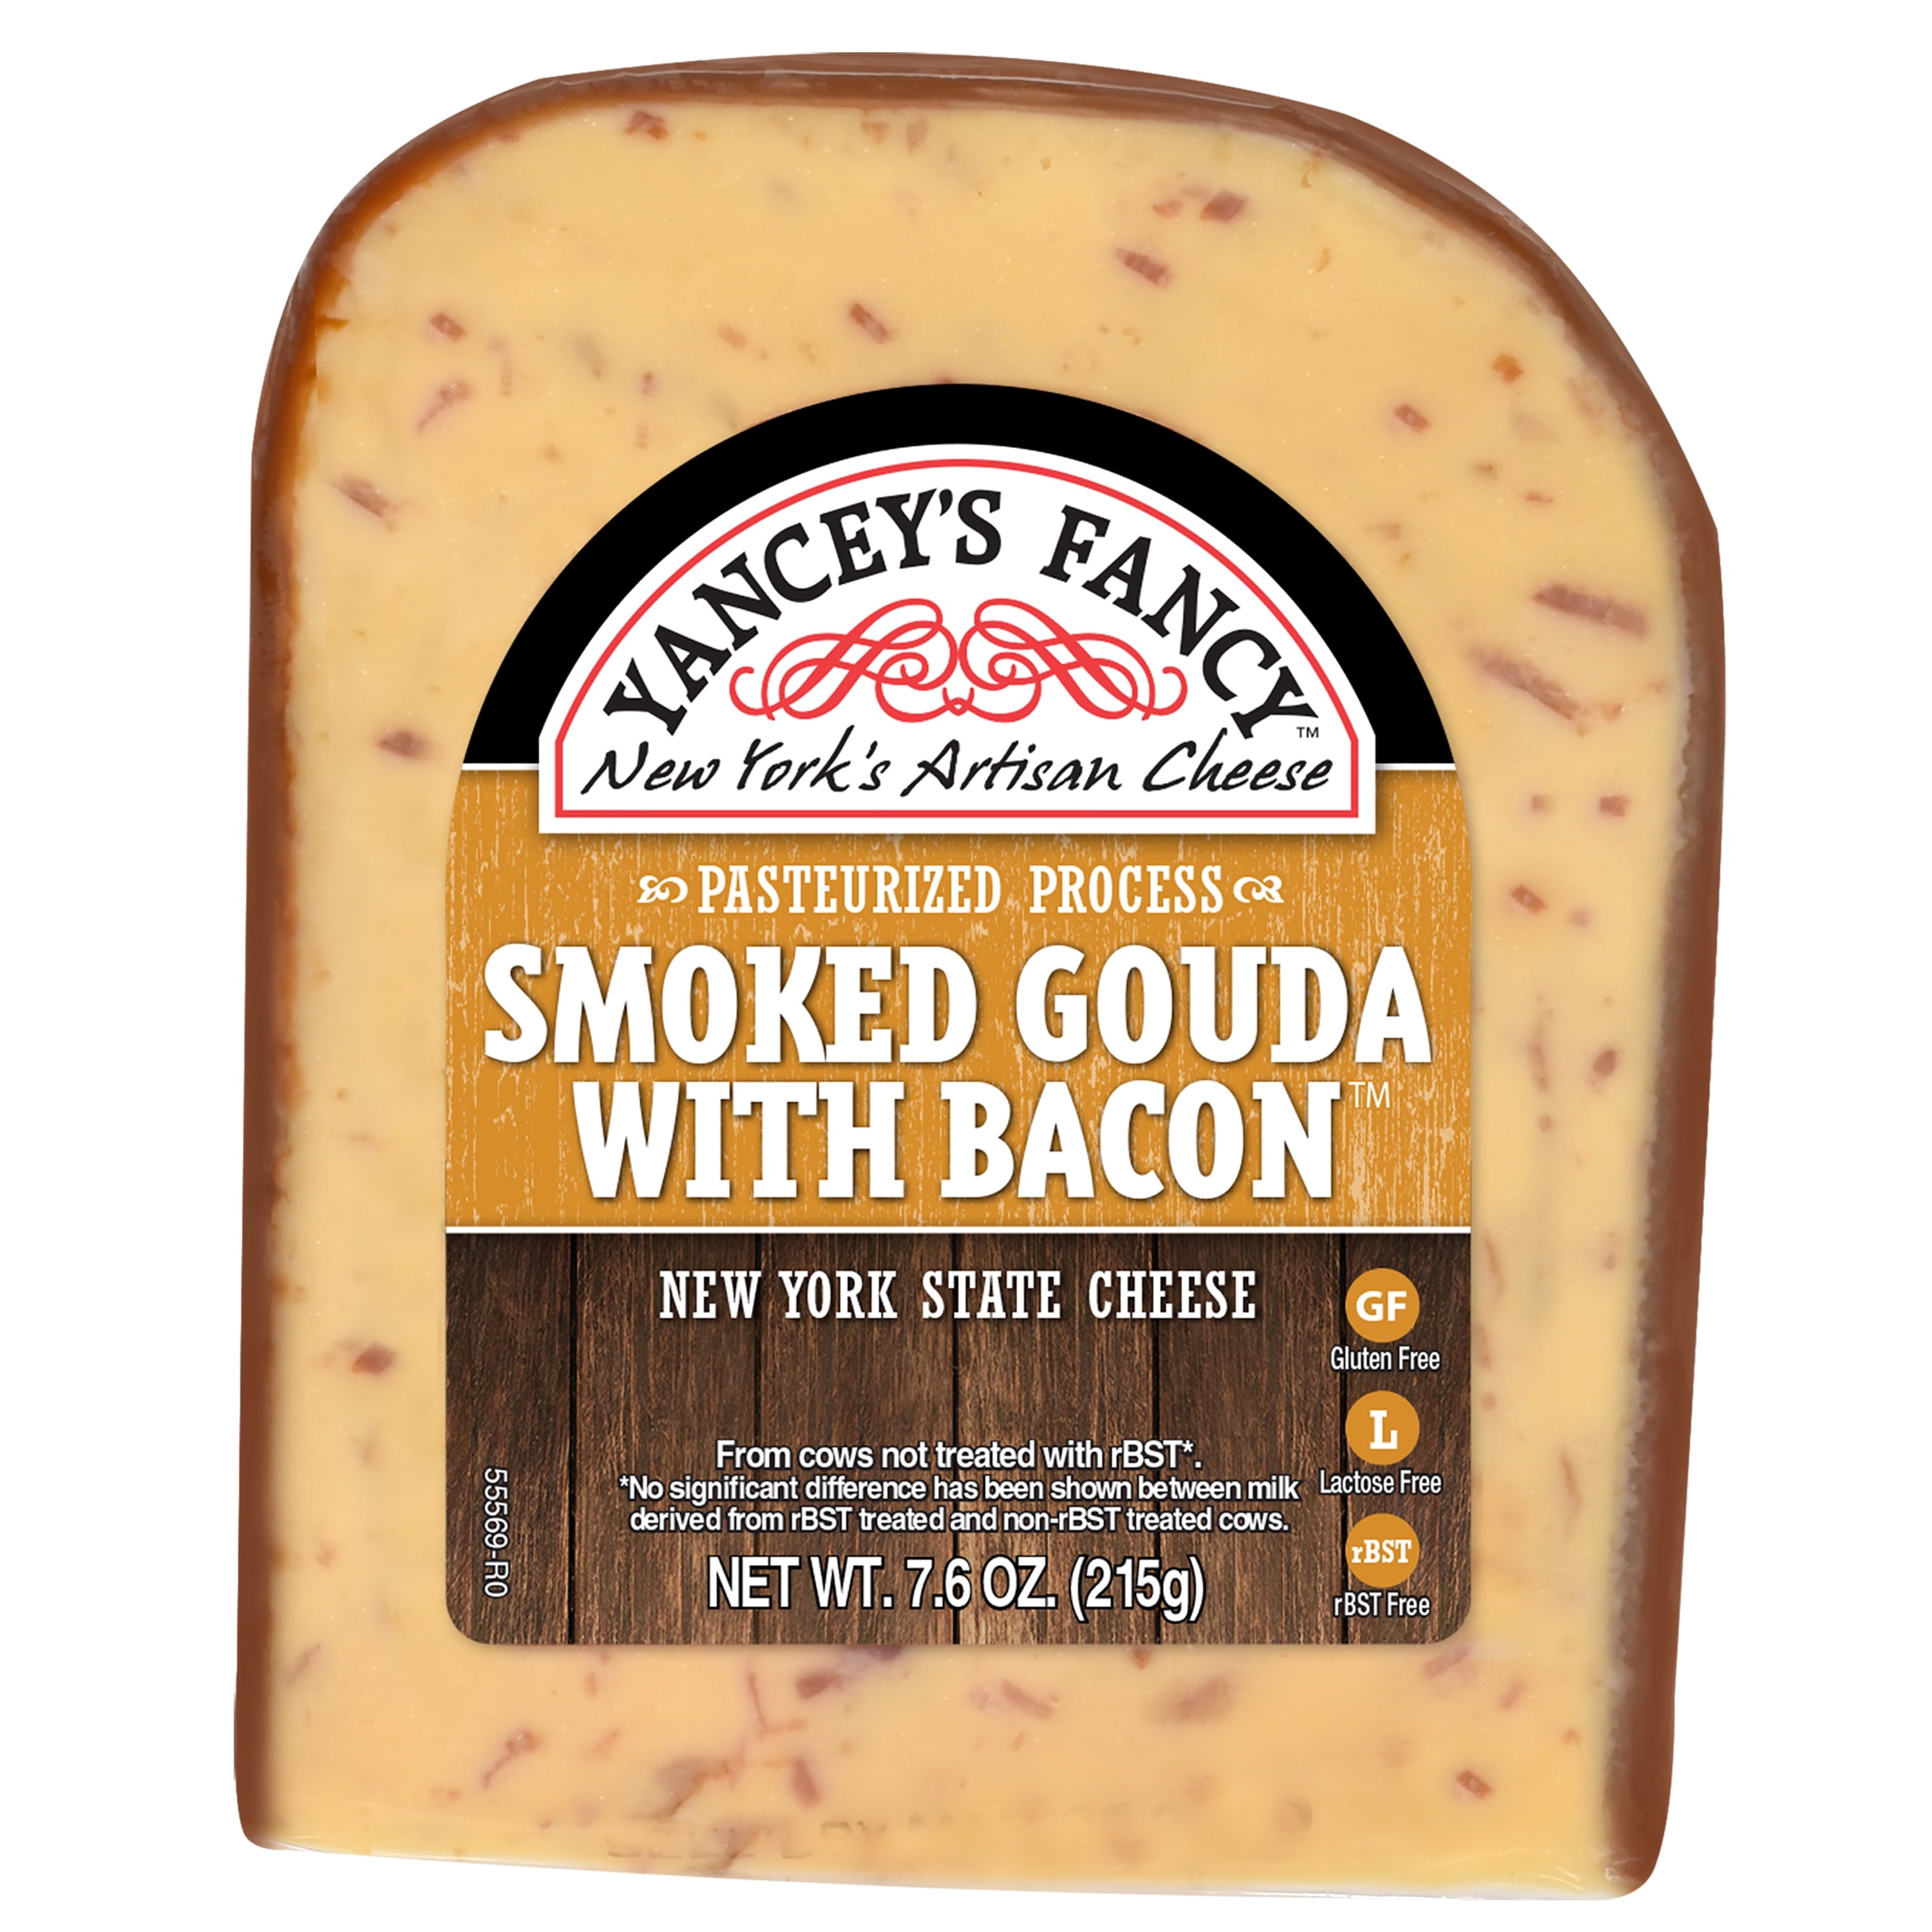 Yancey's Fancy Smoked Gouda Cheese with Bacon 7.6oz 10ct